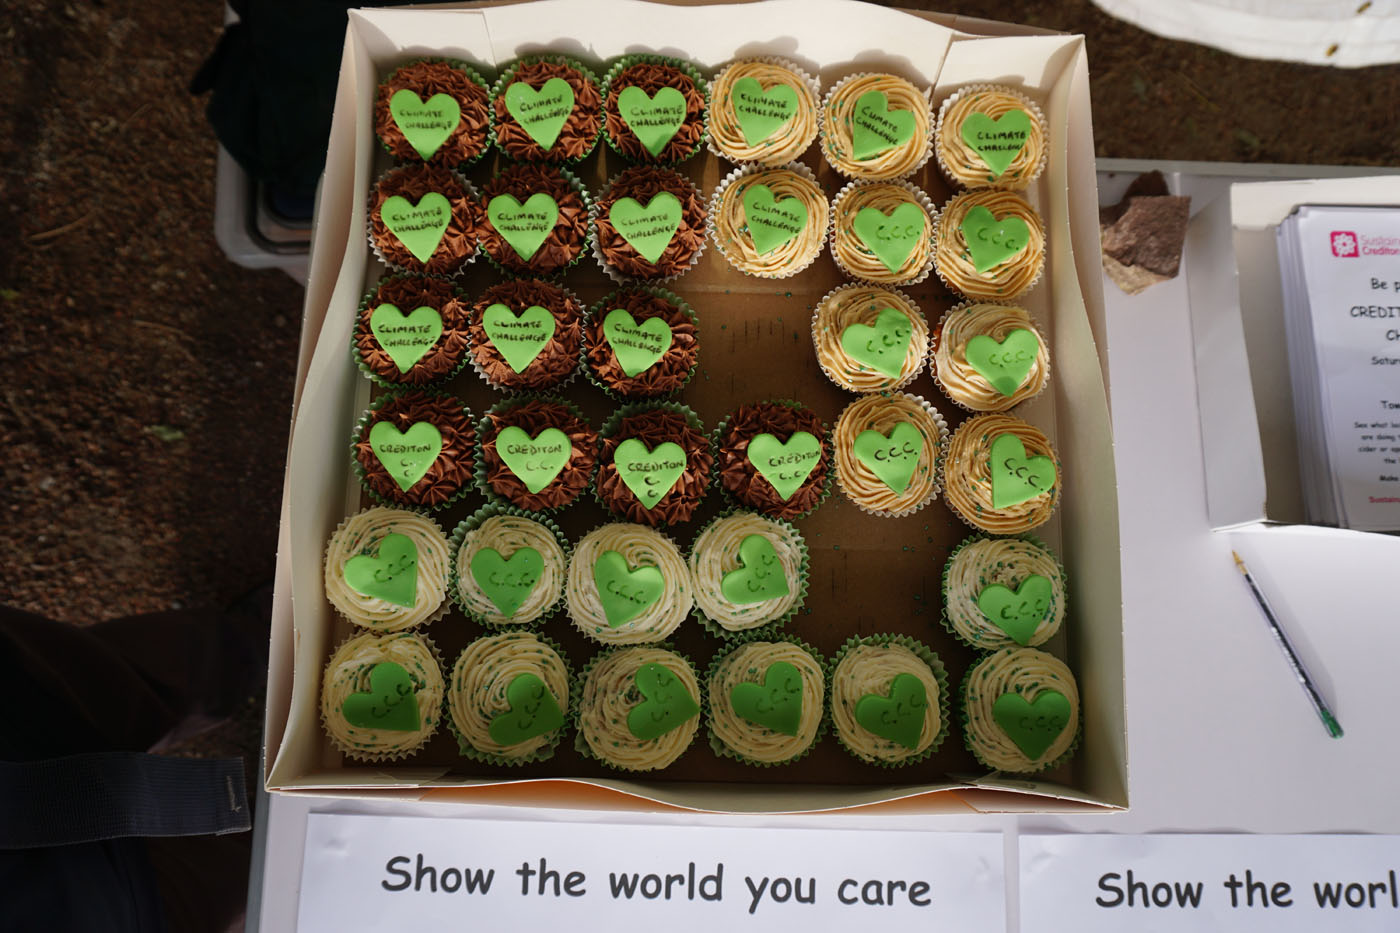 Photograph of a box of cakes decorated with green hearts